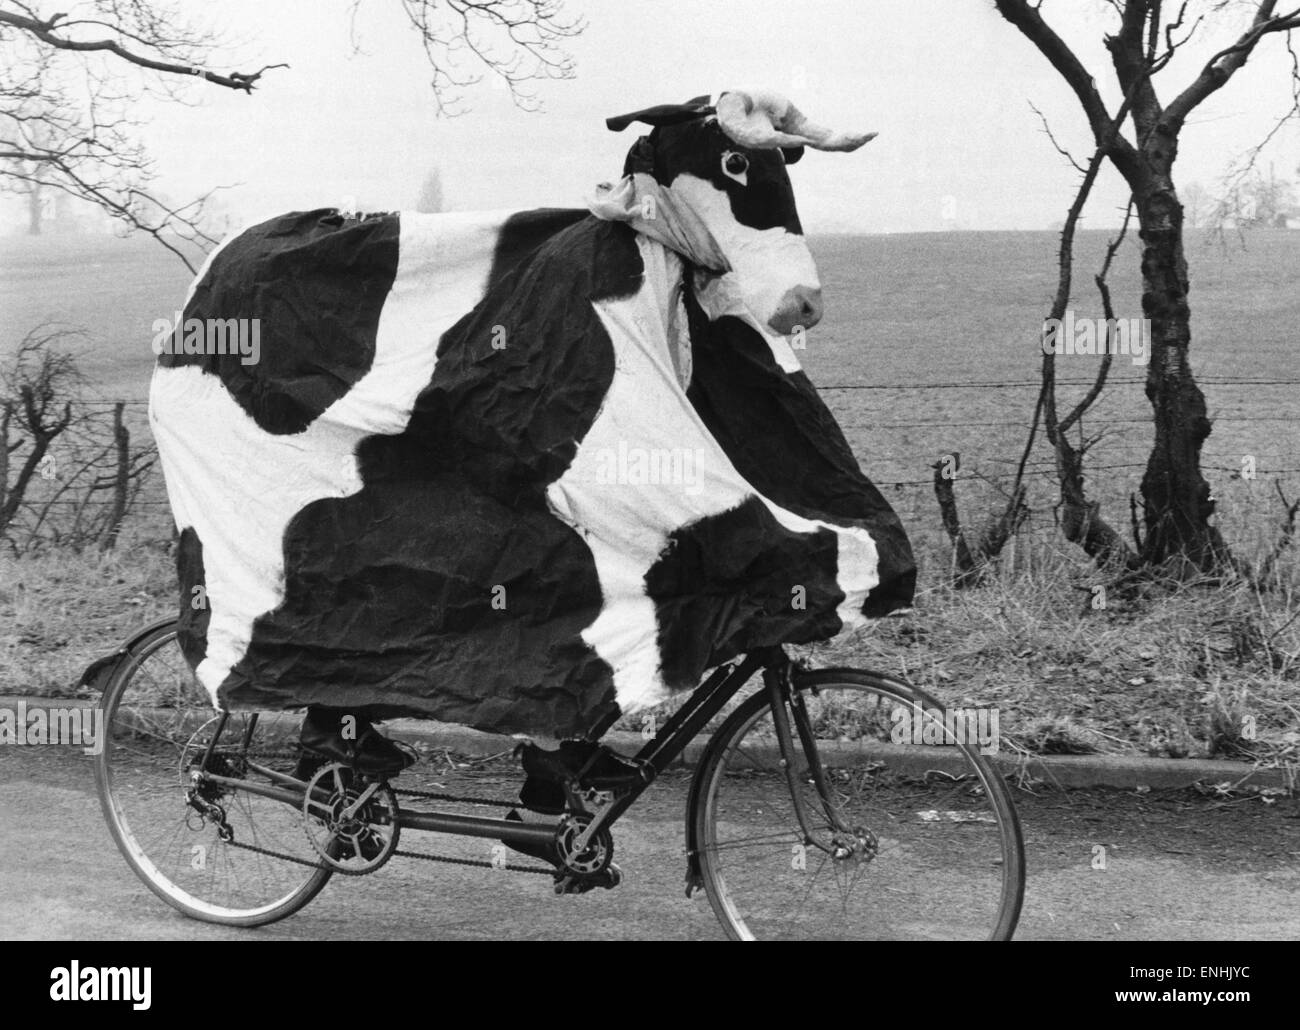 Now here's a likely candidate for this year's milk race, a lady who is way ahead of the common herd. Daisy reckons she's just the cream of amateur cycling -- the faster moo-ver in the West Midlands, so to speak. Daisy the money-raiser on the bicycle. Marc Stock Photo